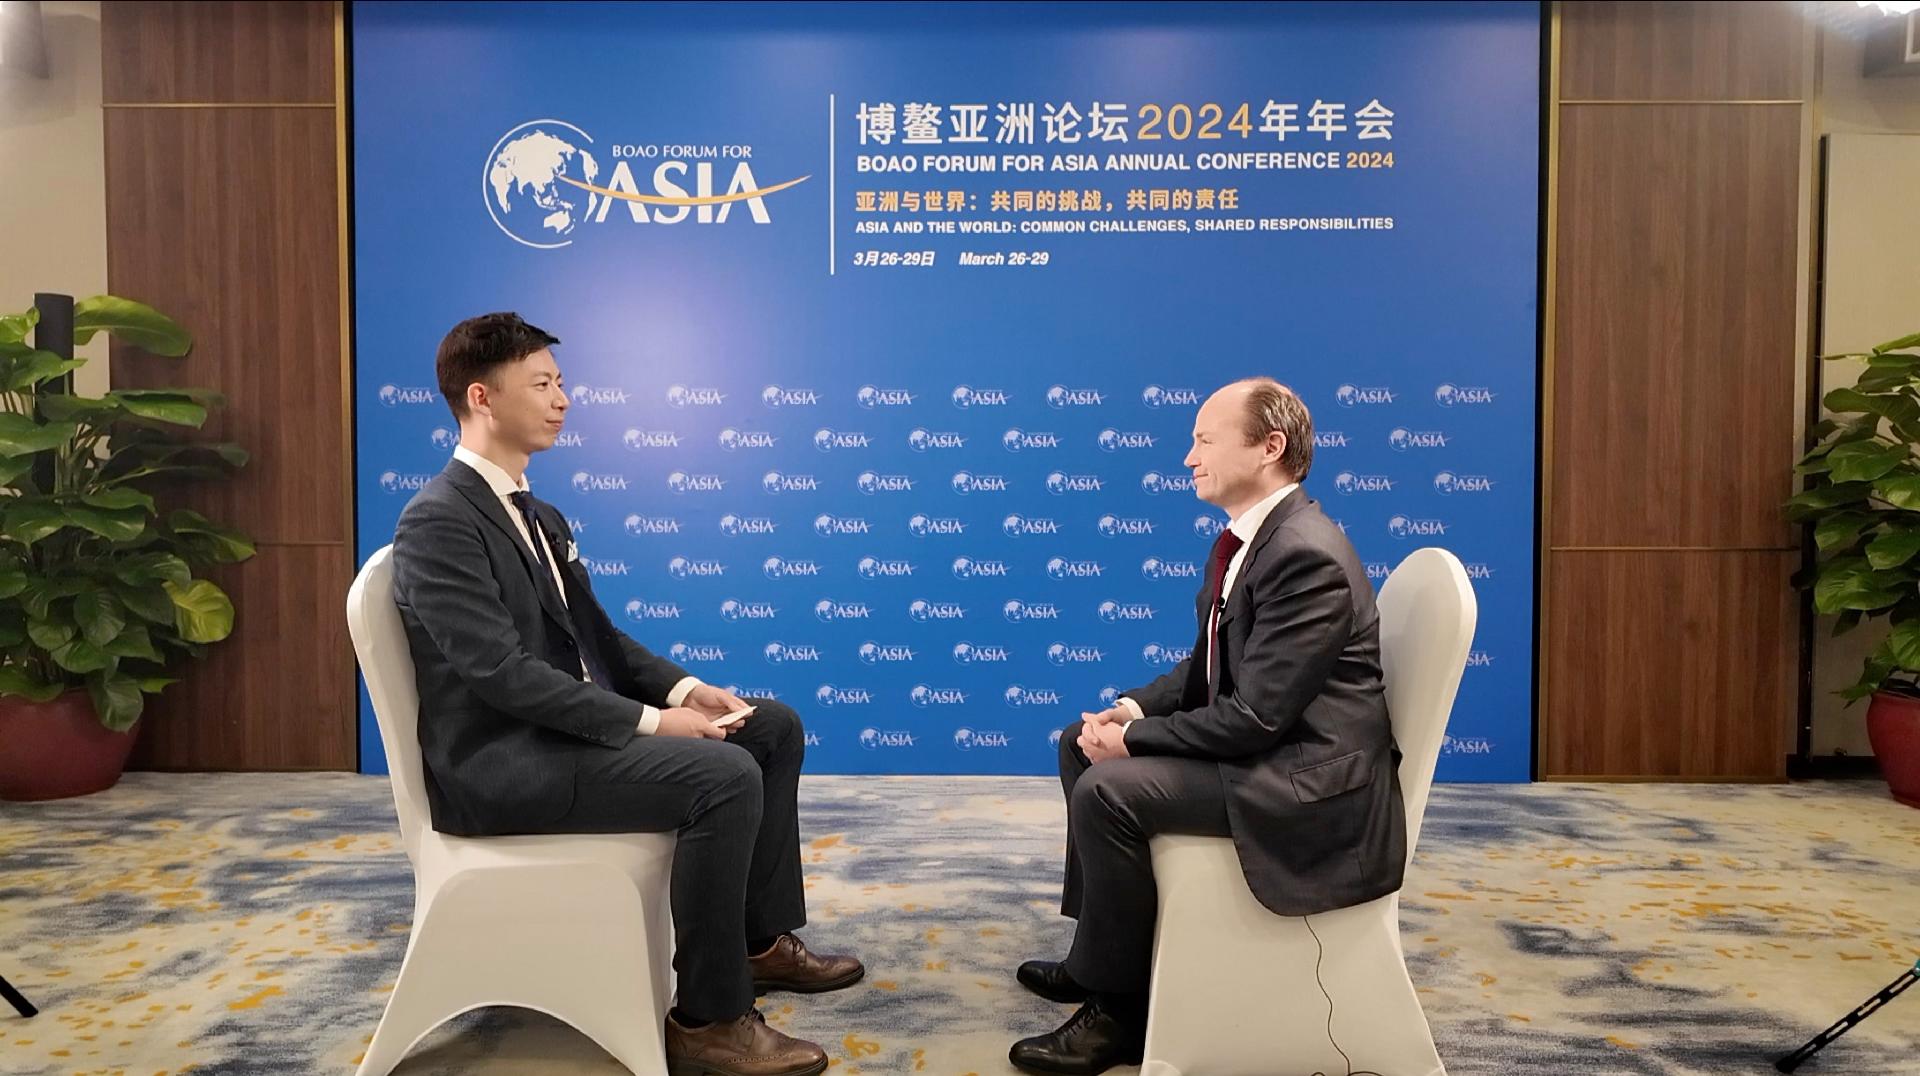 Merck: We are fully committed to long-term growth in China [Video]